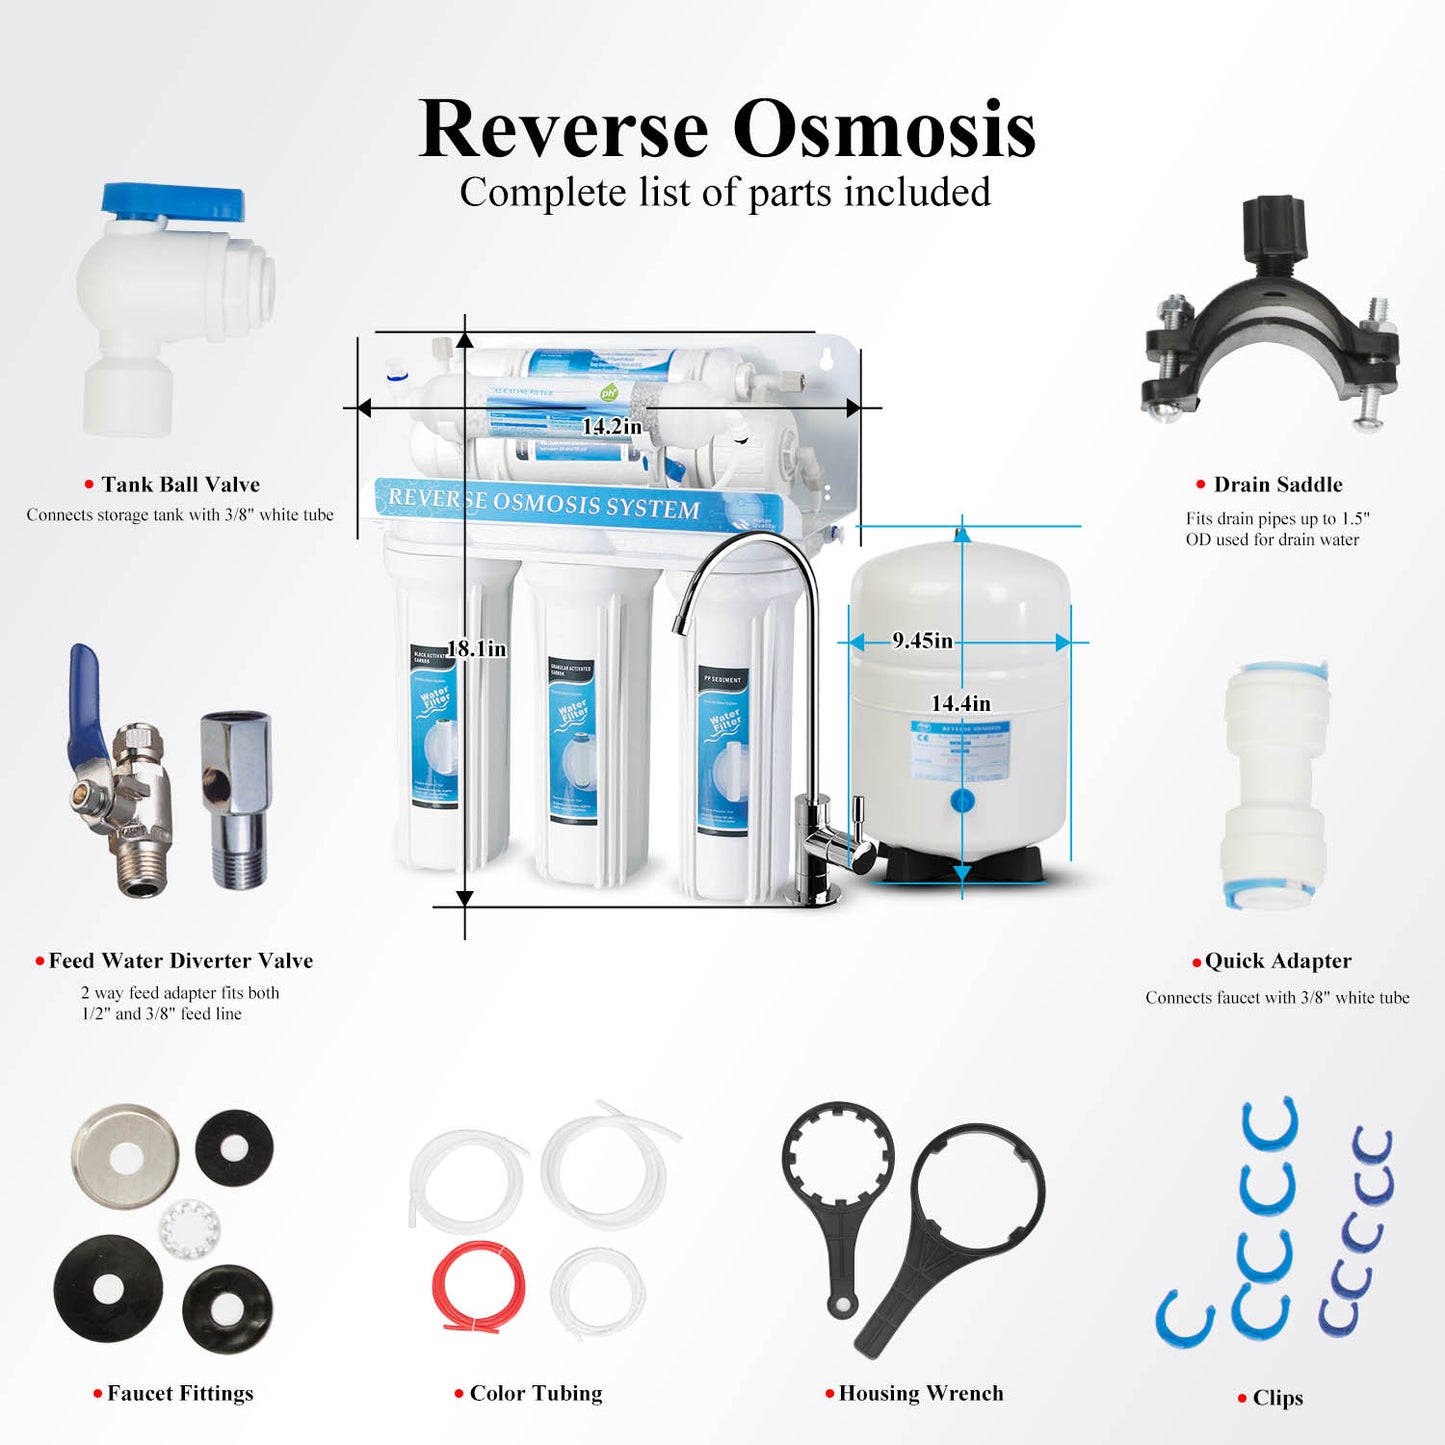 6-Stage Reverse Osmosis Drinking Water Filter System w/ Alkaline pH+ Filter-75 GPD